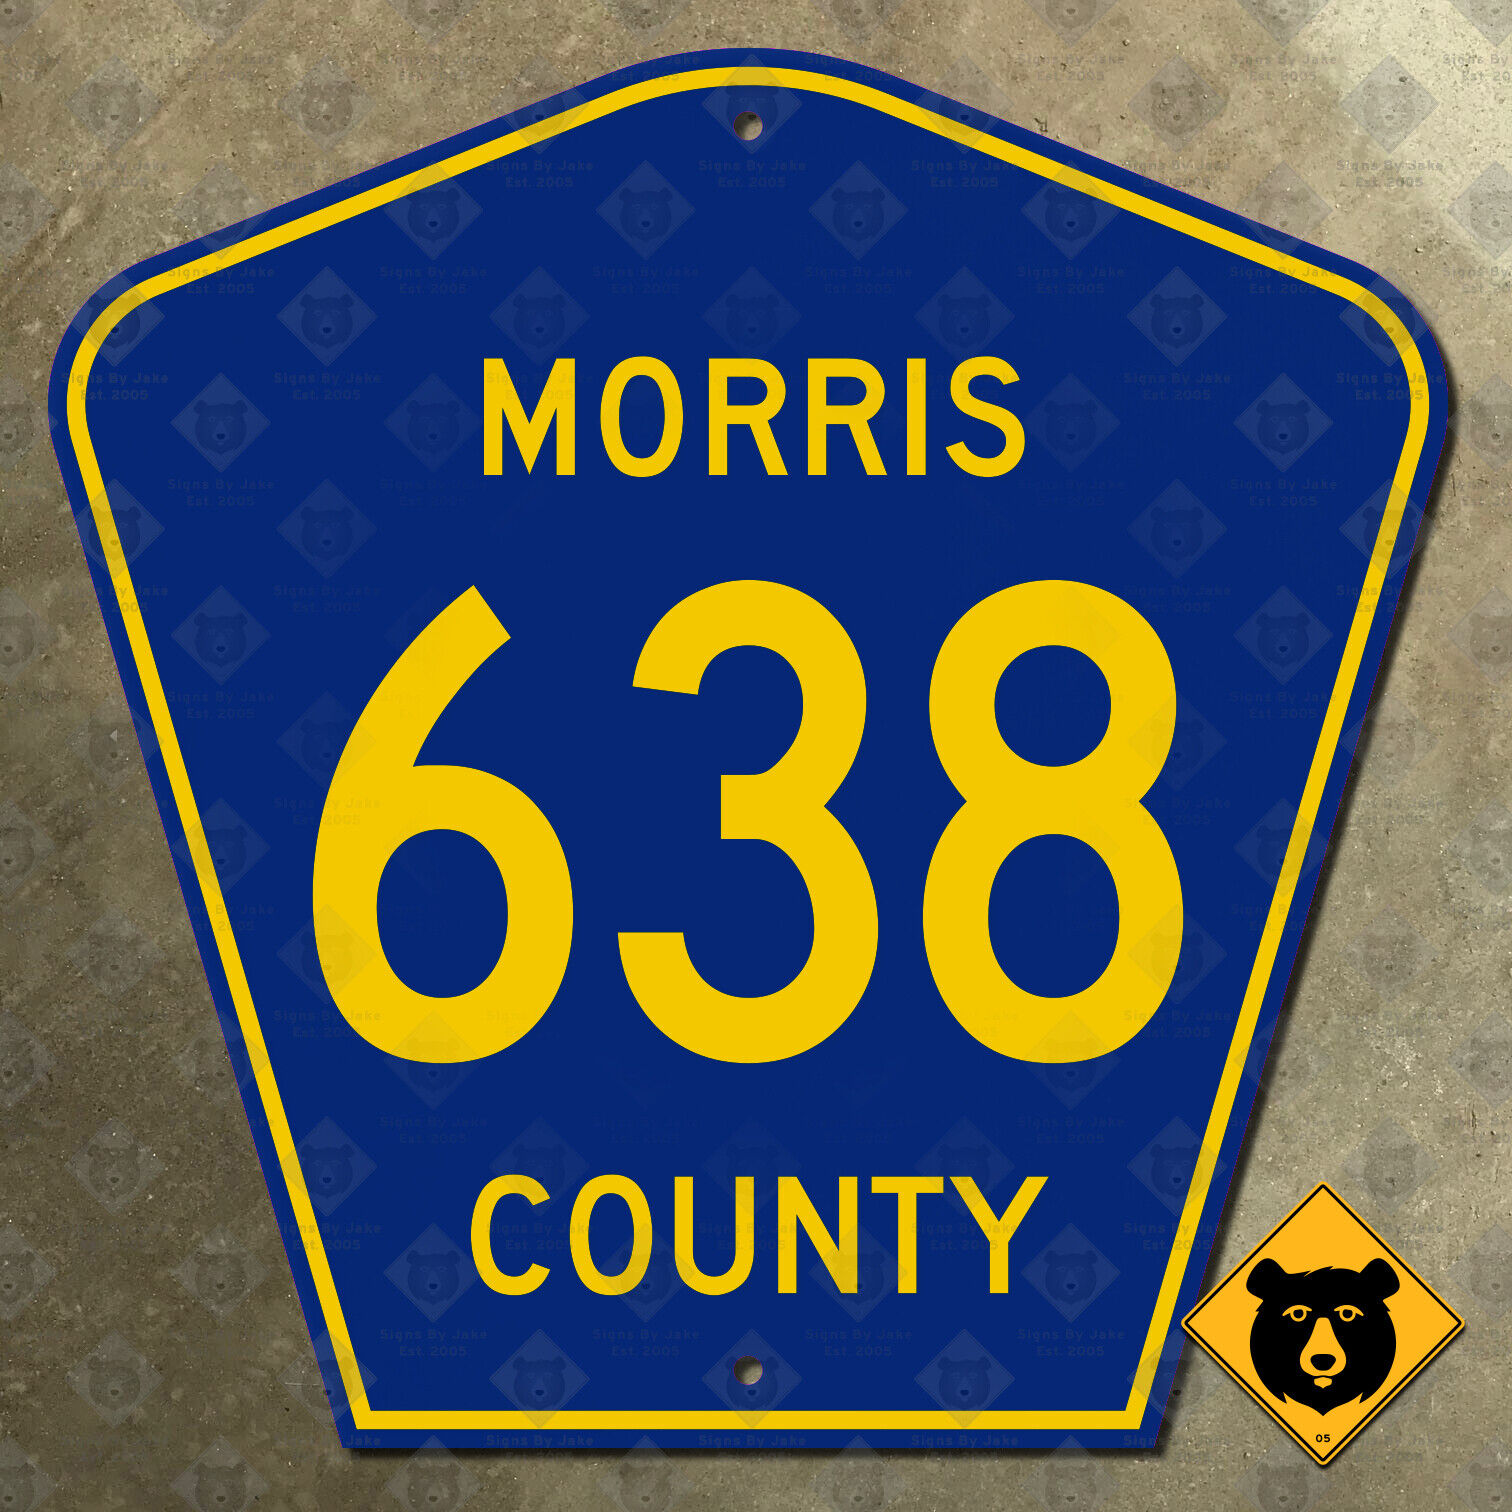 New Jersey Morris County Road 638 highway route marker sign 12x12